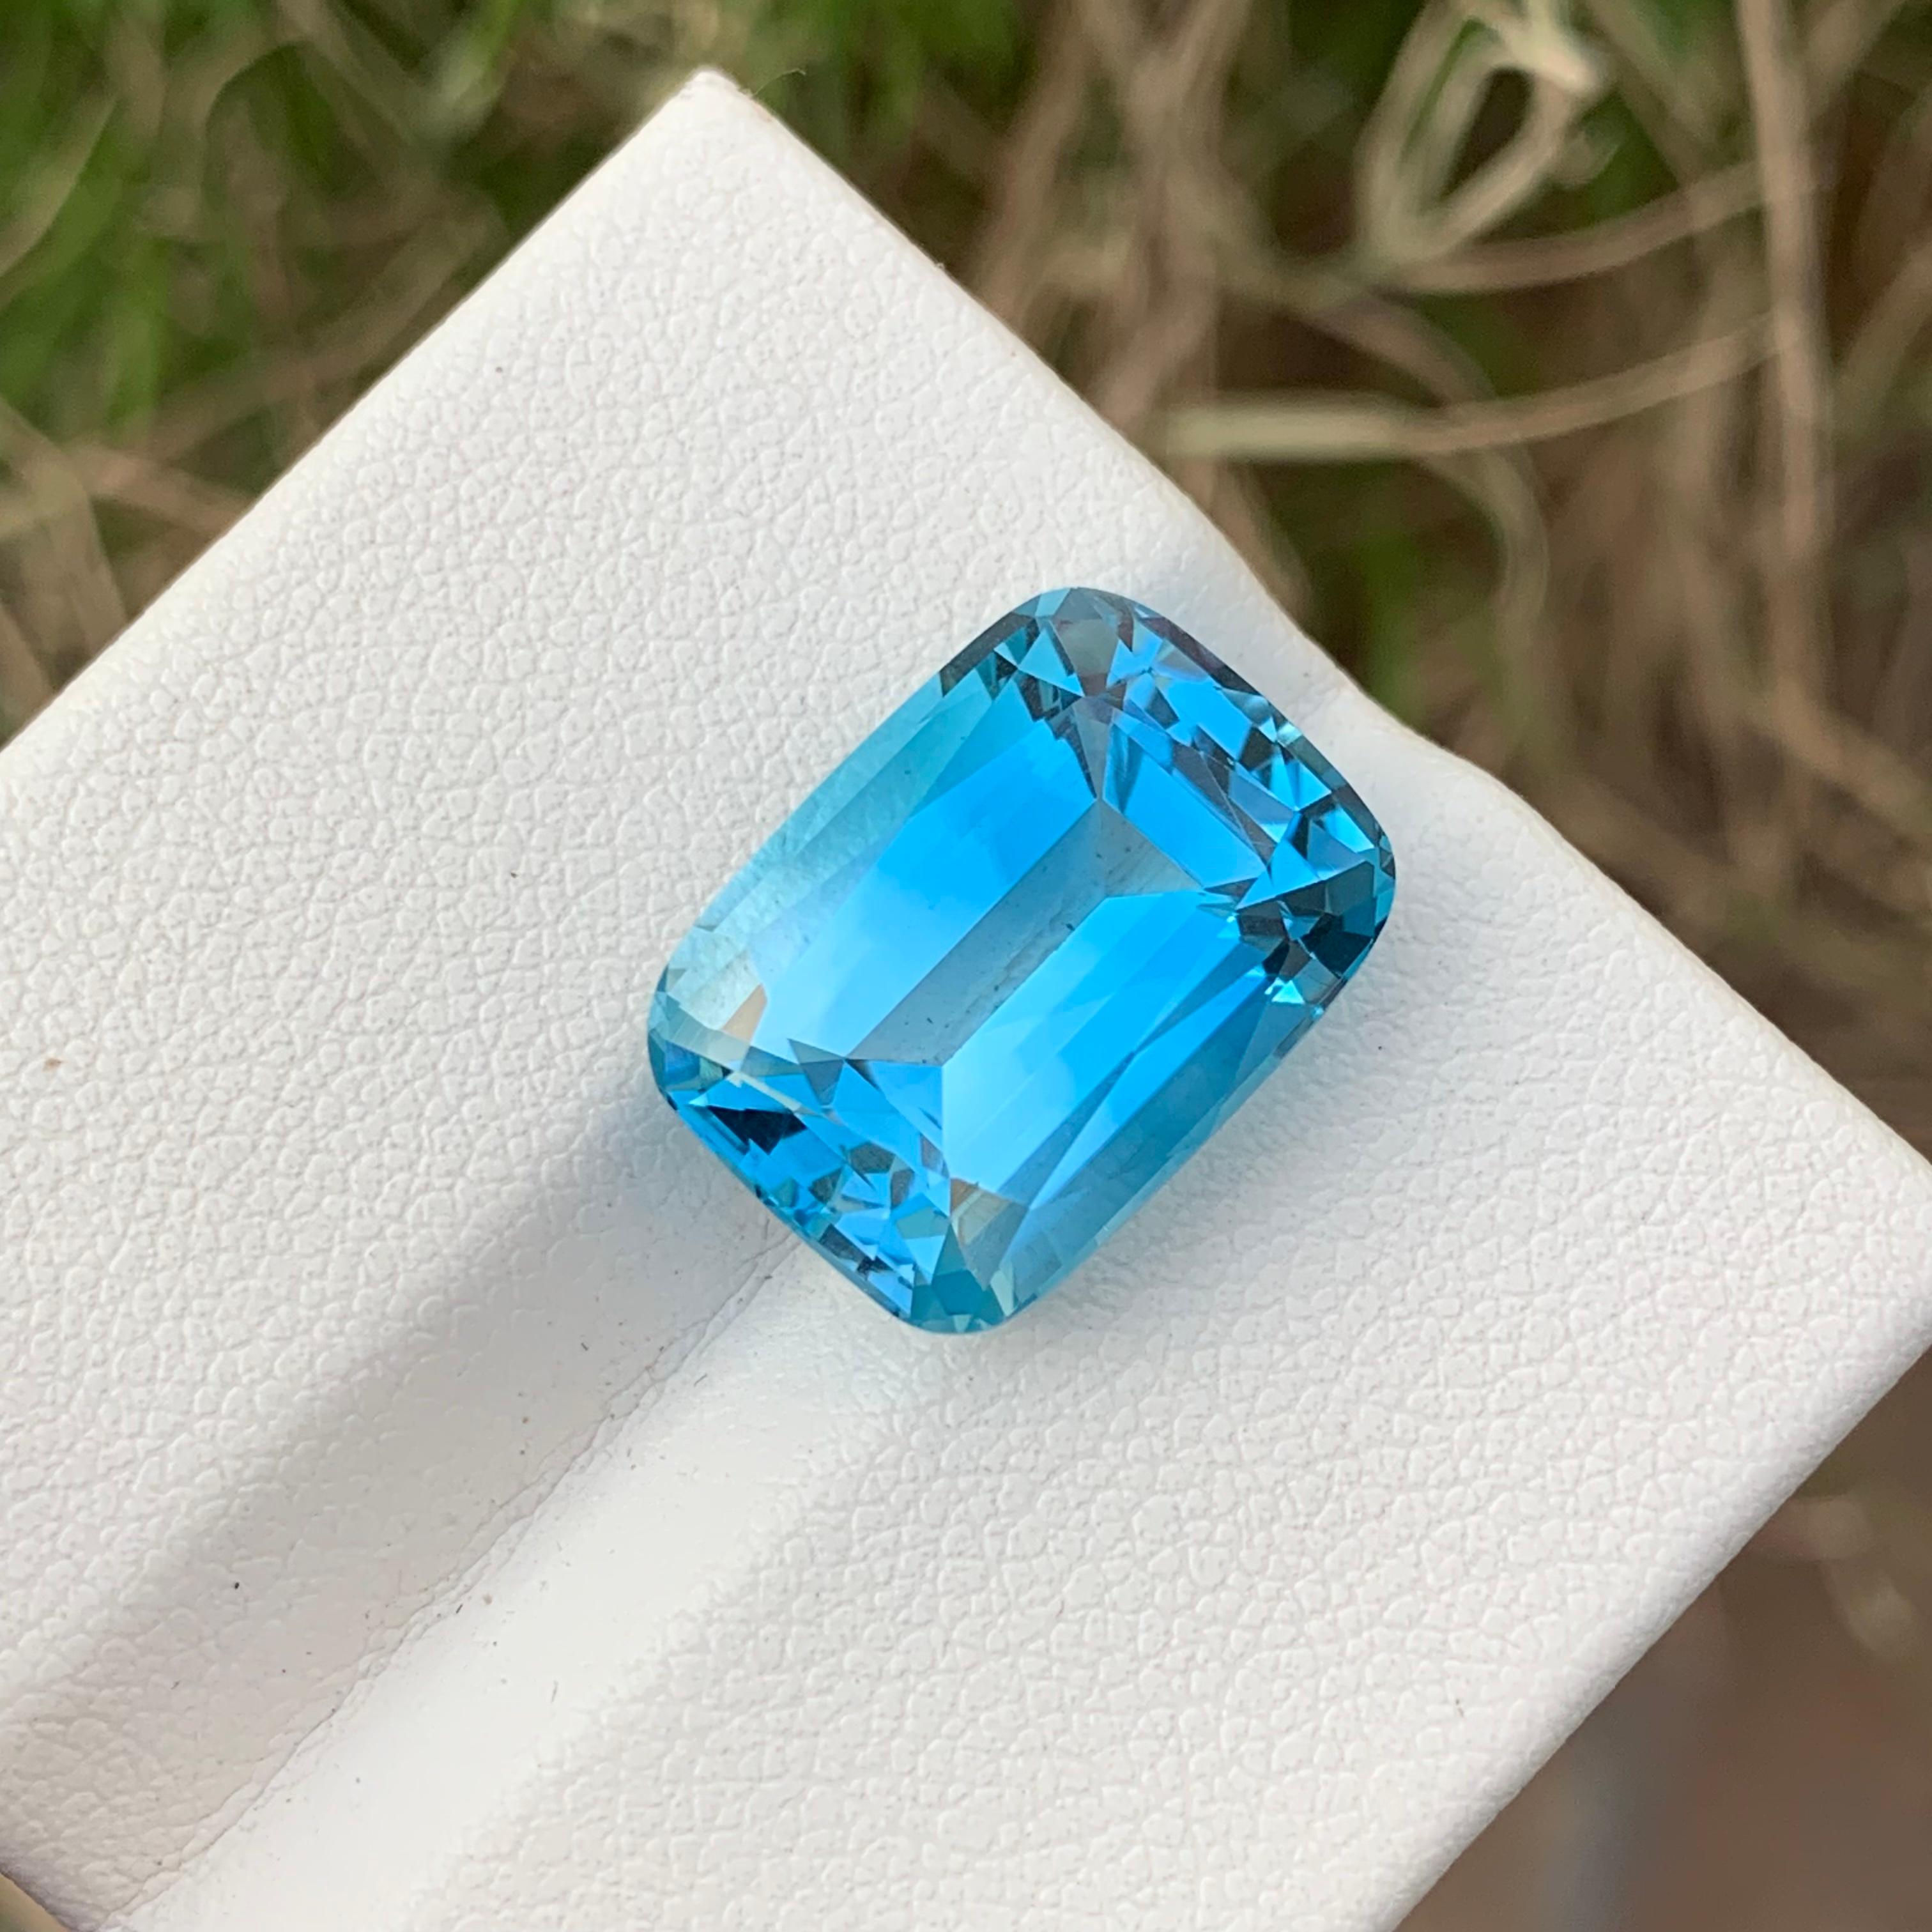 Gorgeous 14.95 Cts Faceted Blue Topaz Gemstone Long Cushion Cut From Brazil Mine For Sale 8